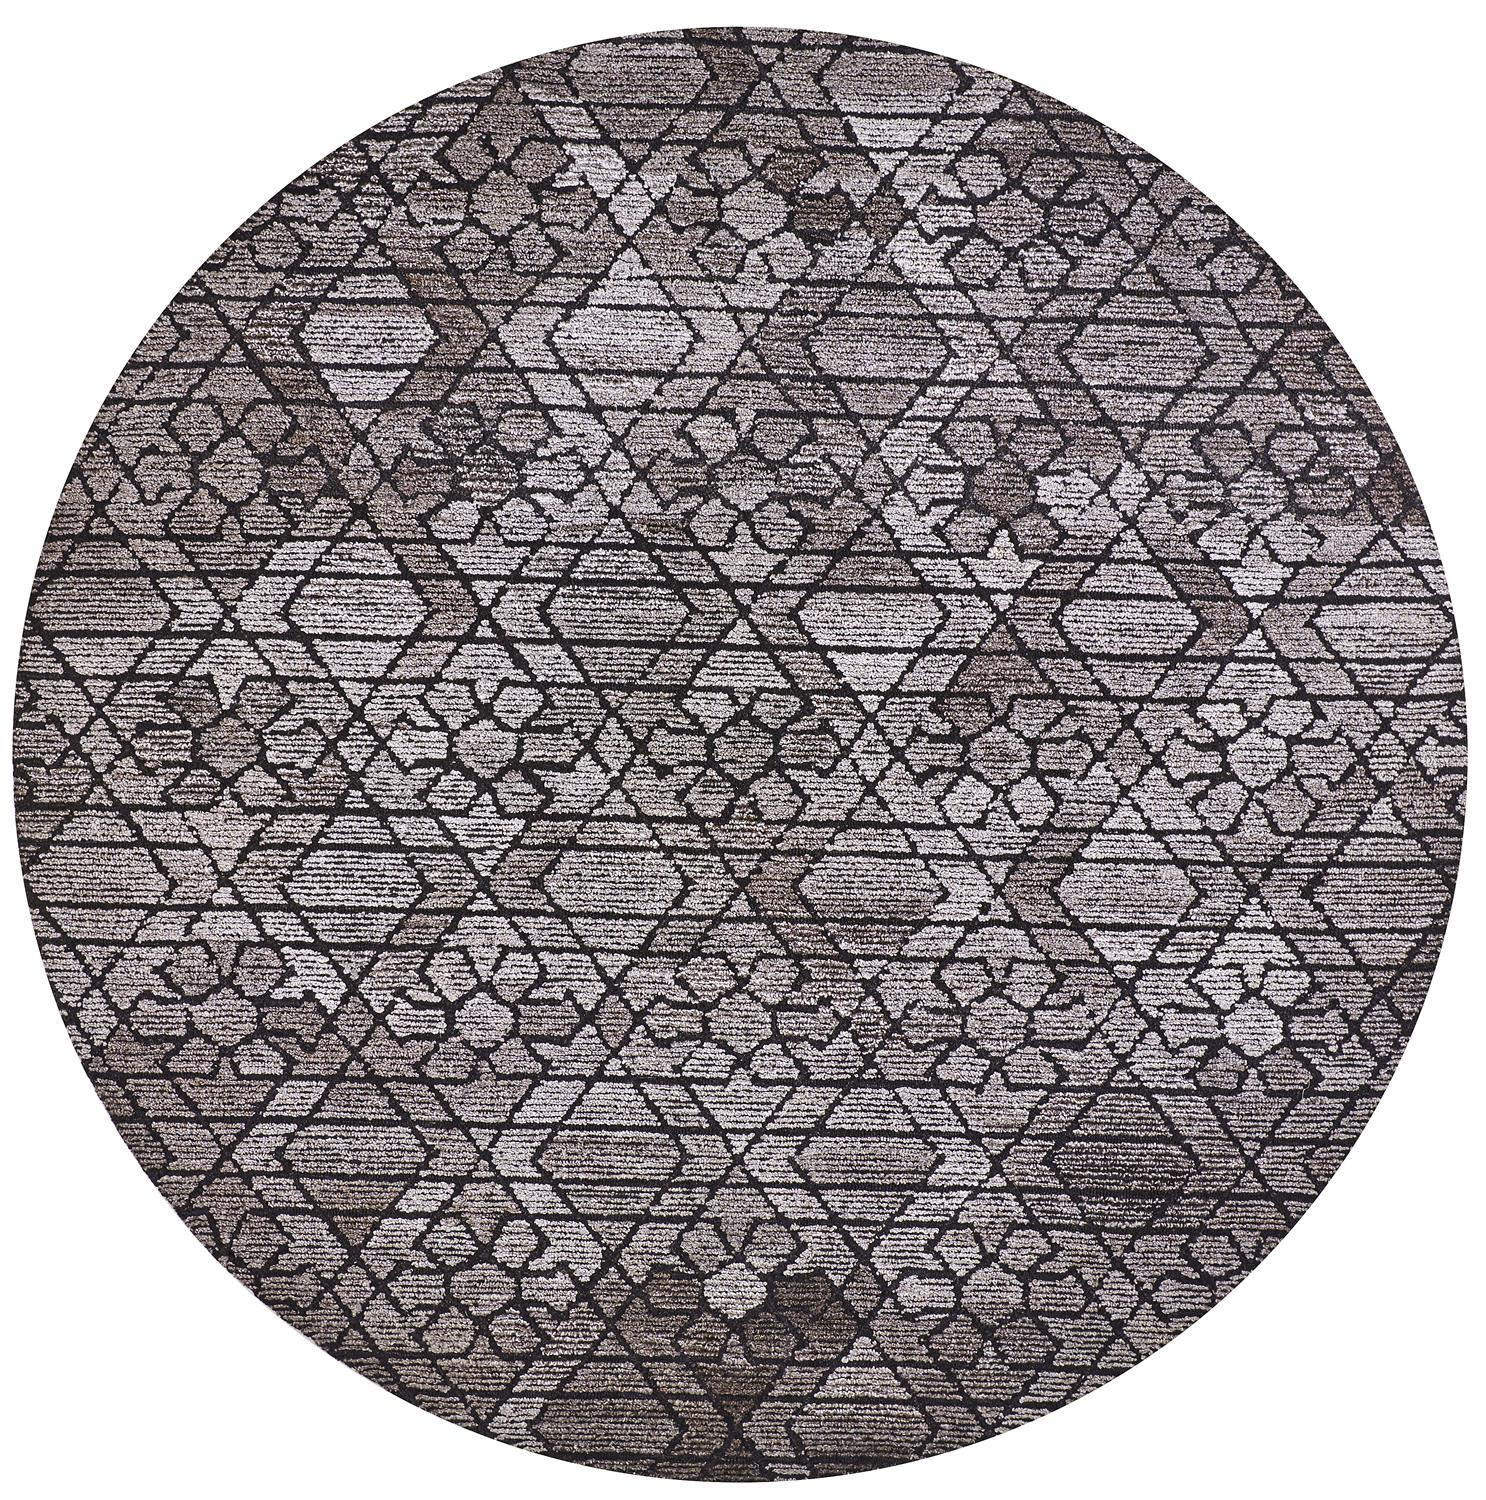 8' Taupe Black And Gray Round Wool Paisley Tufted Handmade Area Rug-512009-1